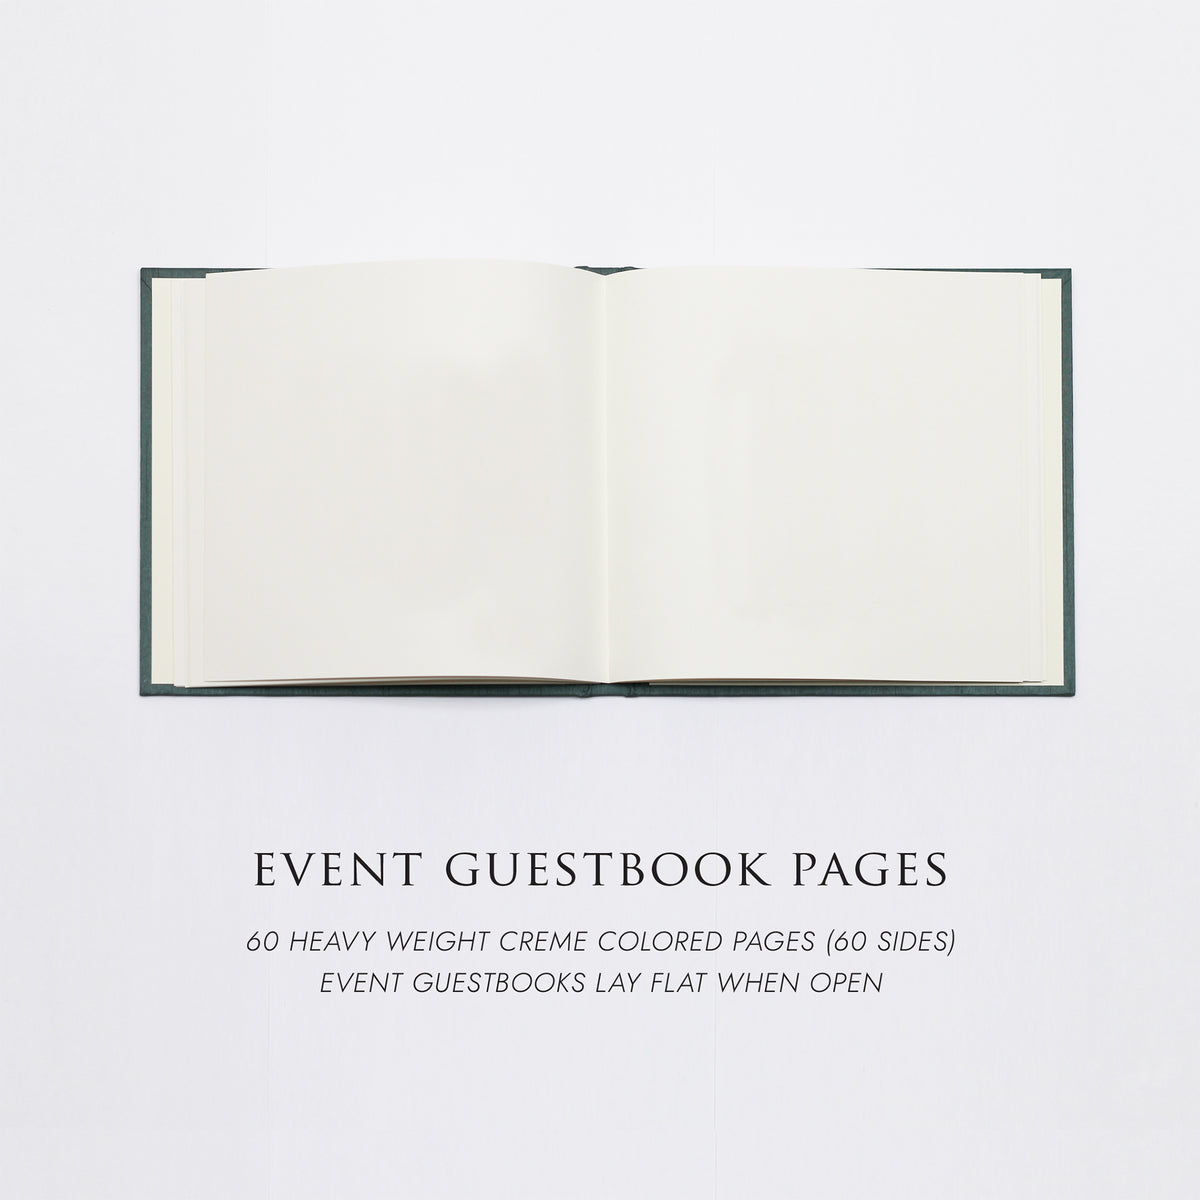 Event Guestbook Embossed with “Guests” with Amethyst Silk Cover